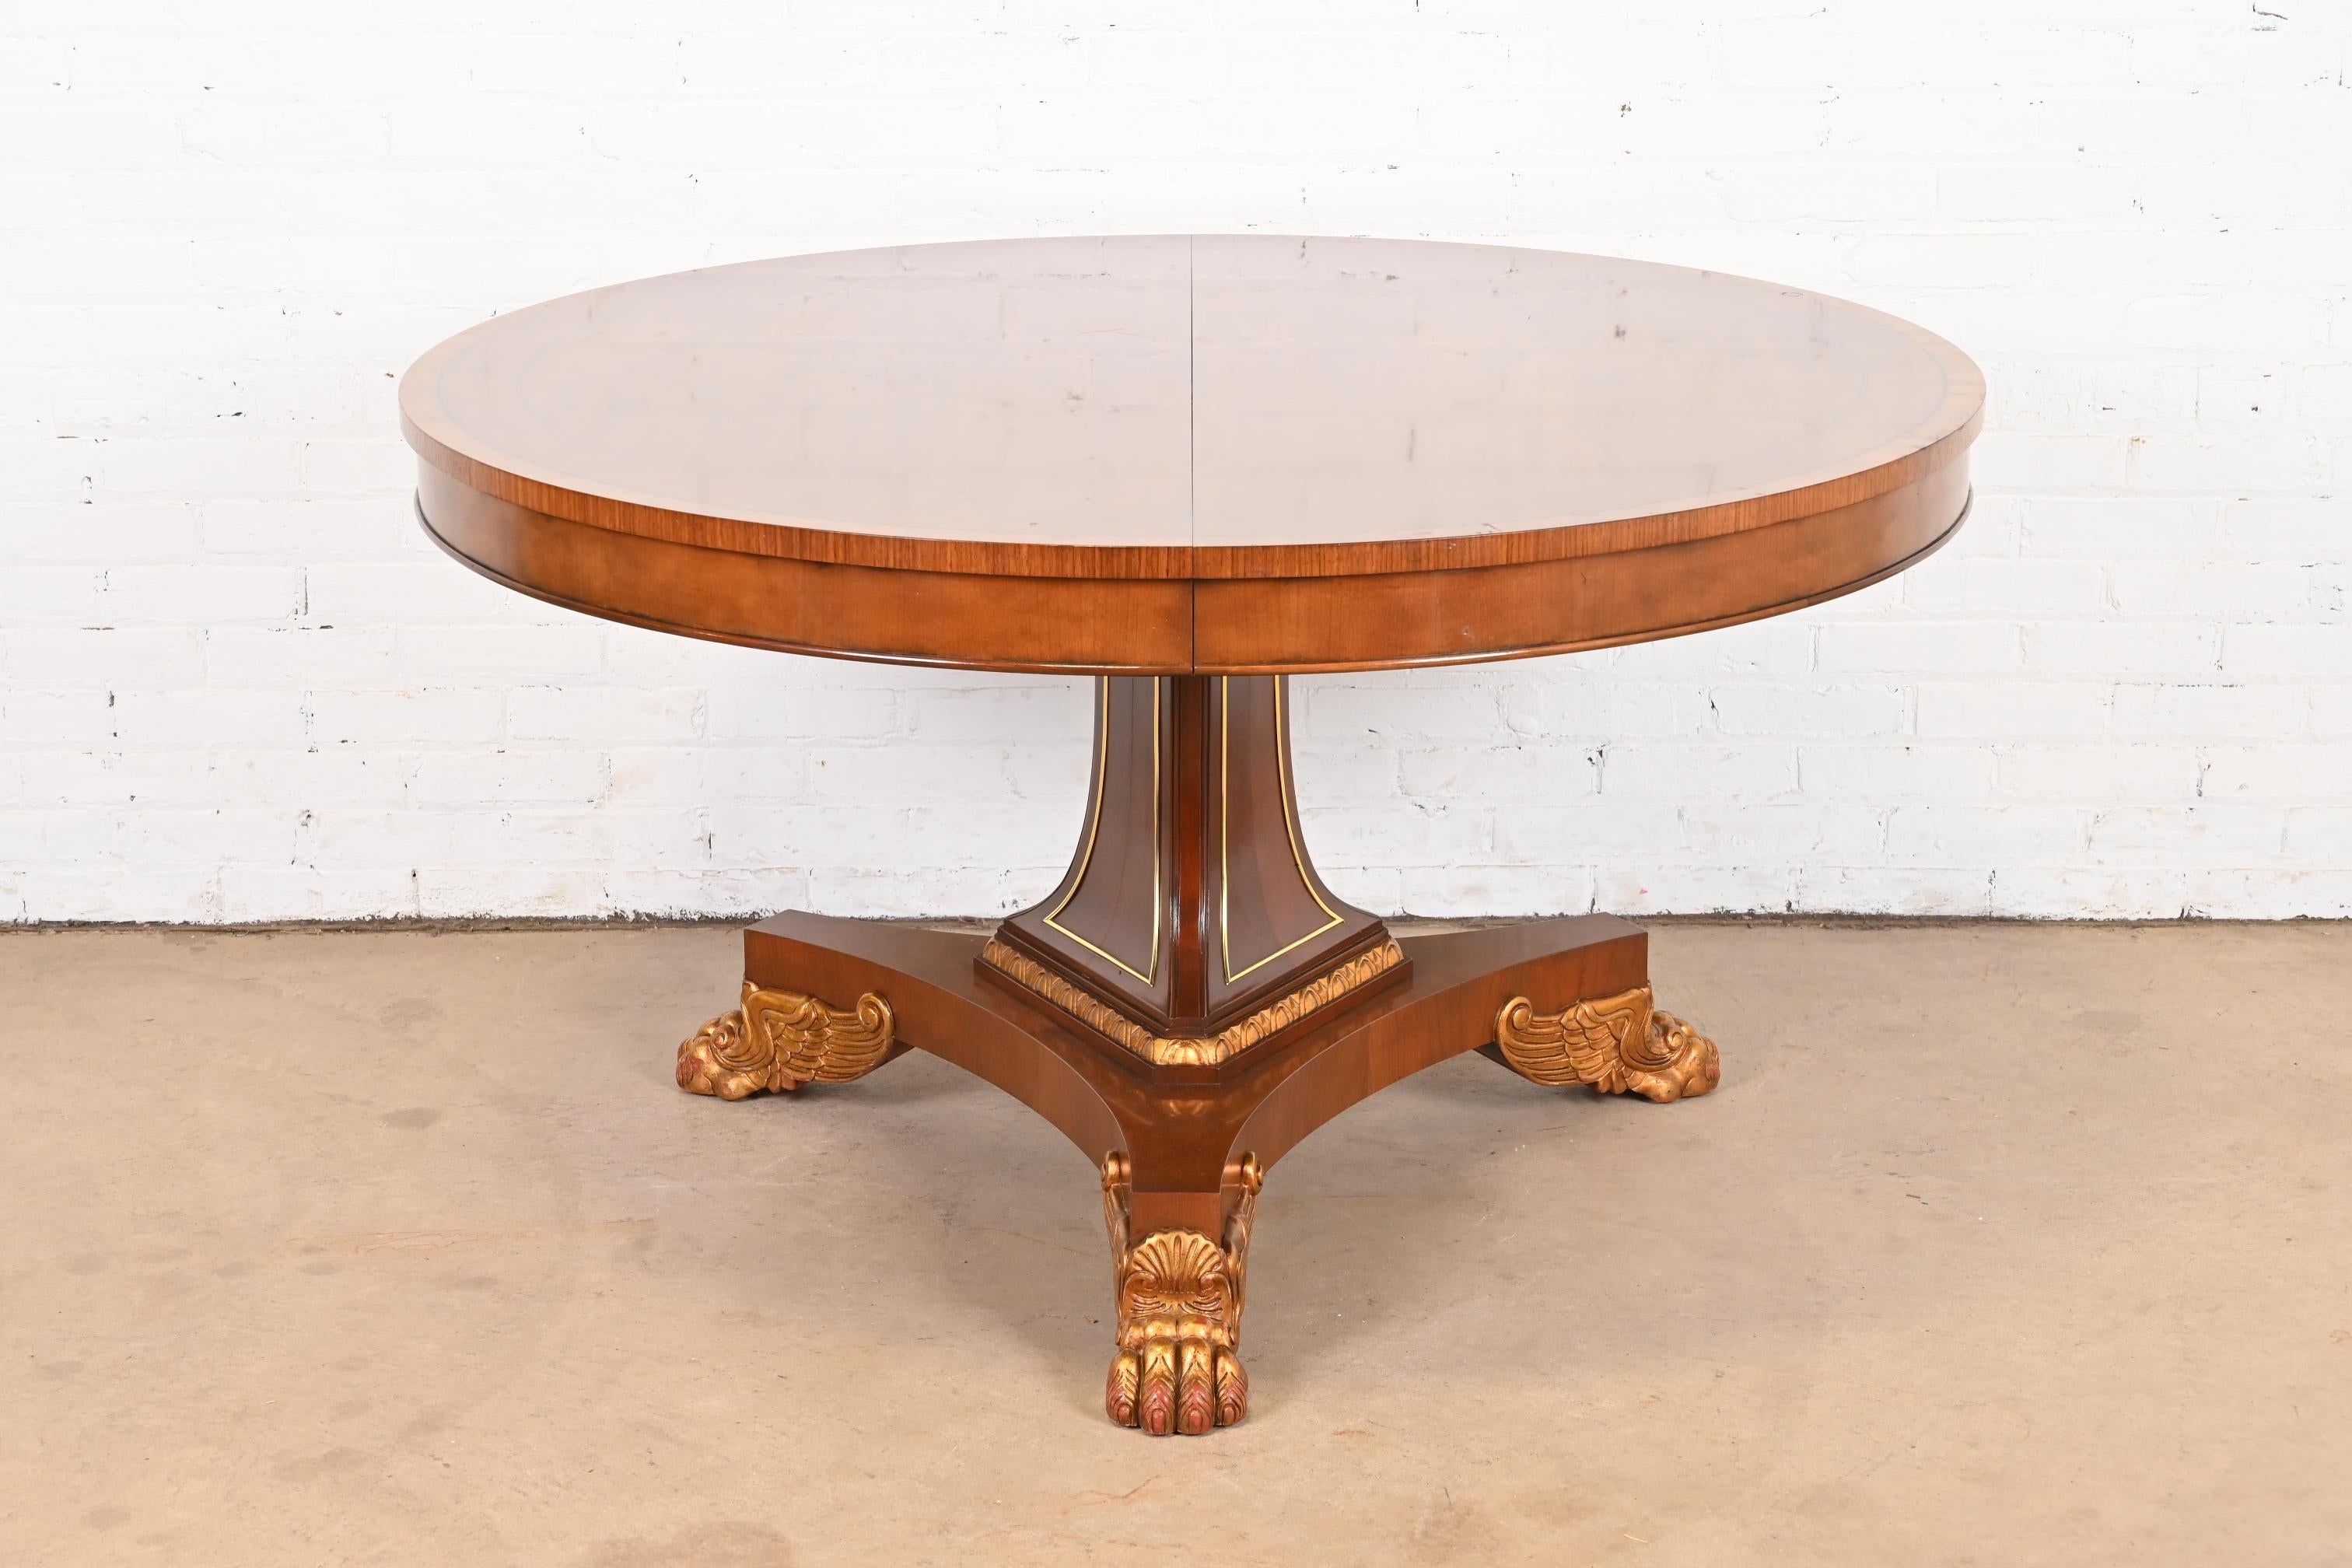 A gorgeous Empire, Regency, or Neoclassical style round pedestal breakfast table, game table, or center table

By Baker Furniture

USA, Circa 1980s

Beautiful book-matched cherry wood, with rosewood banding and ebony string inlay. The pedestal with